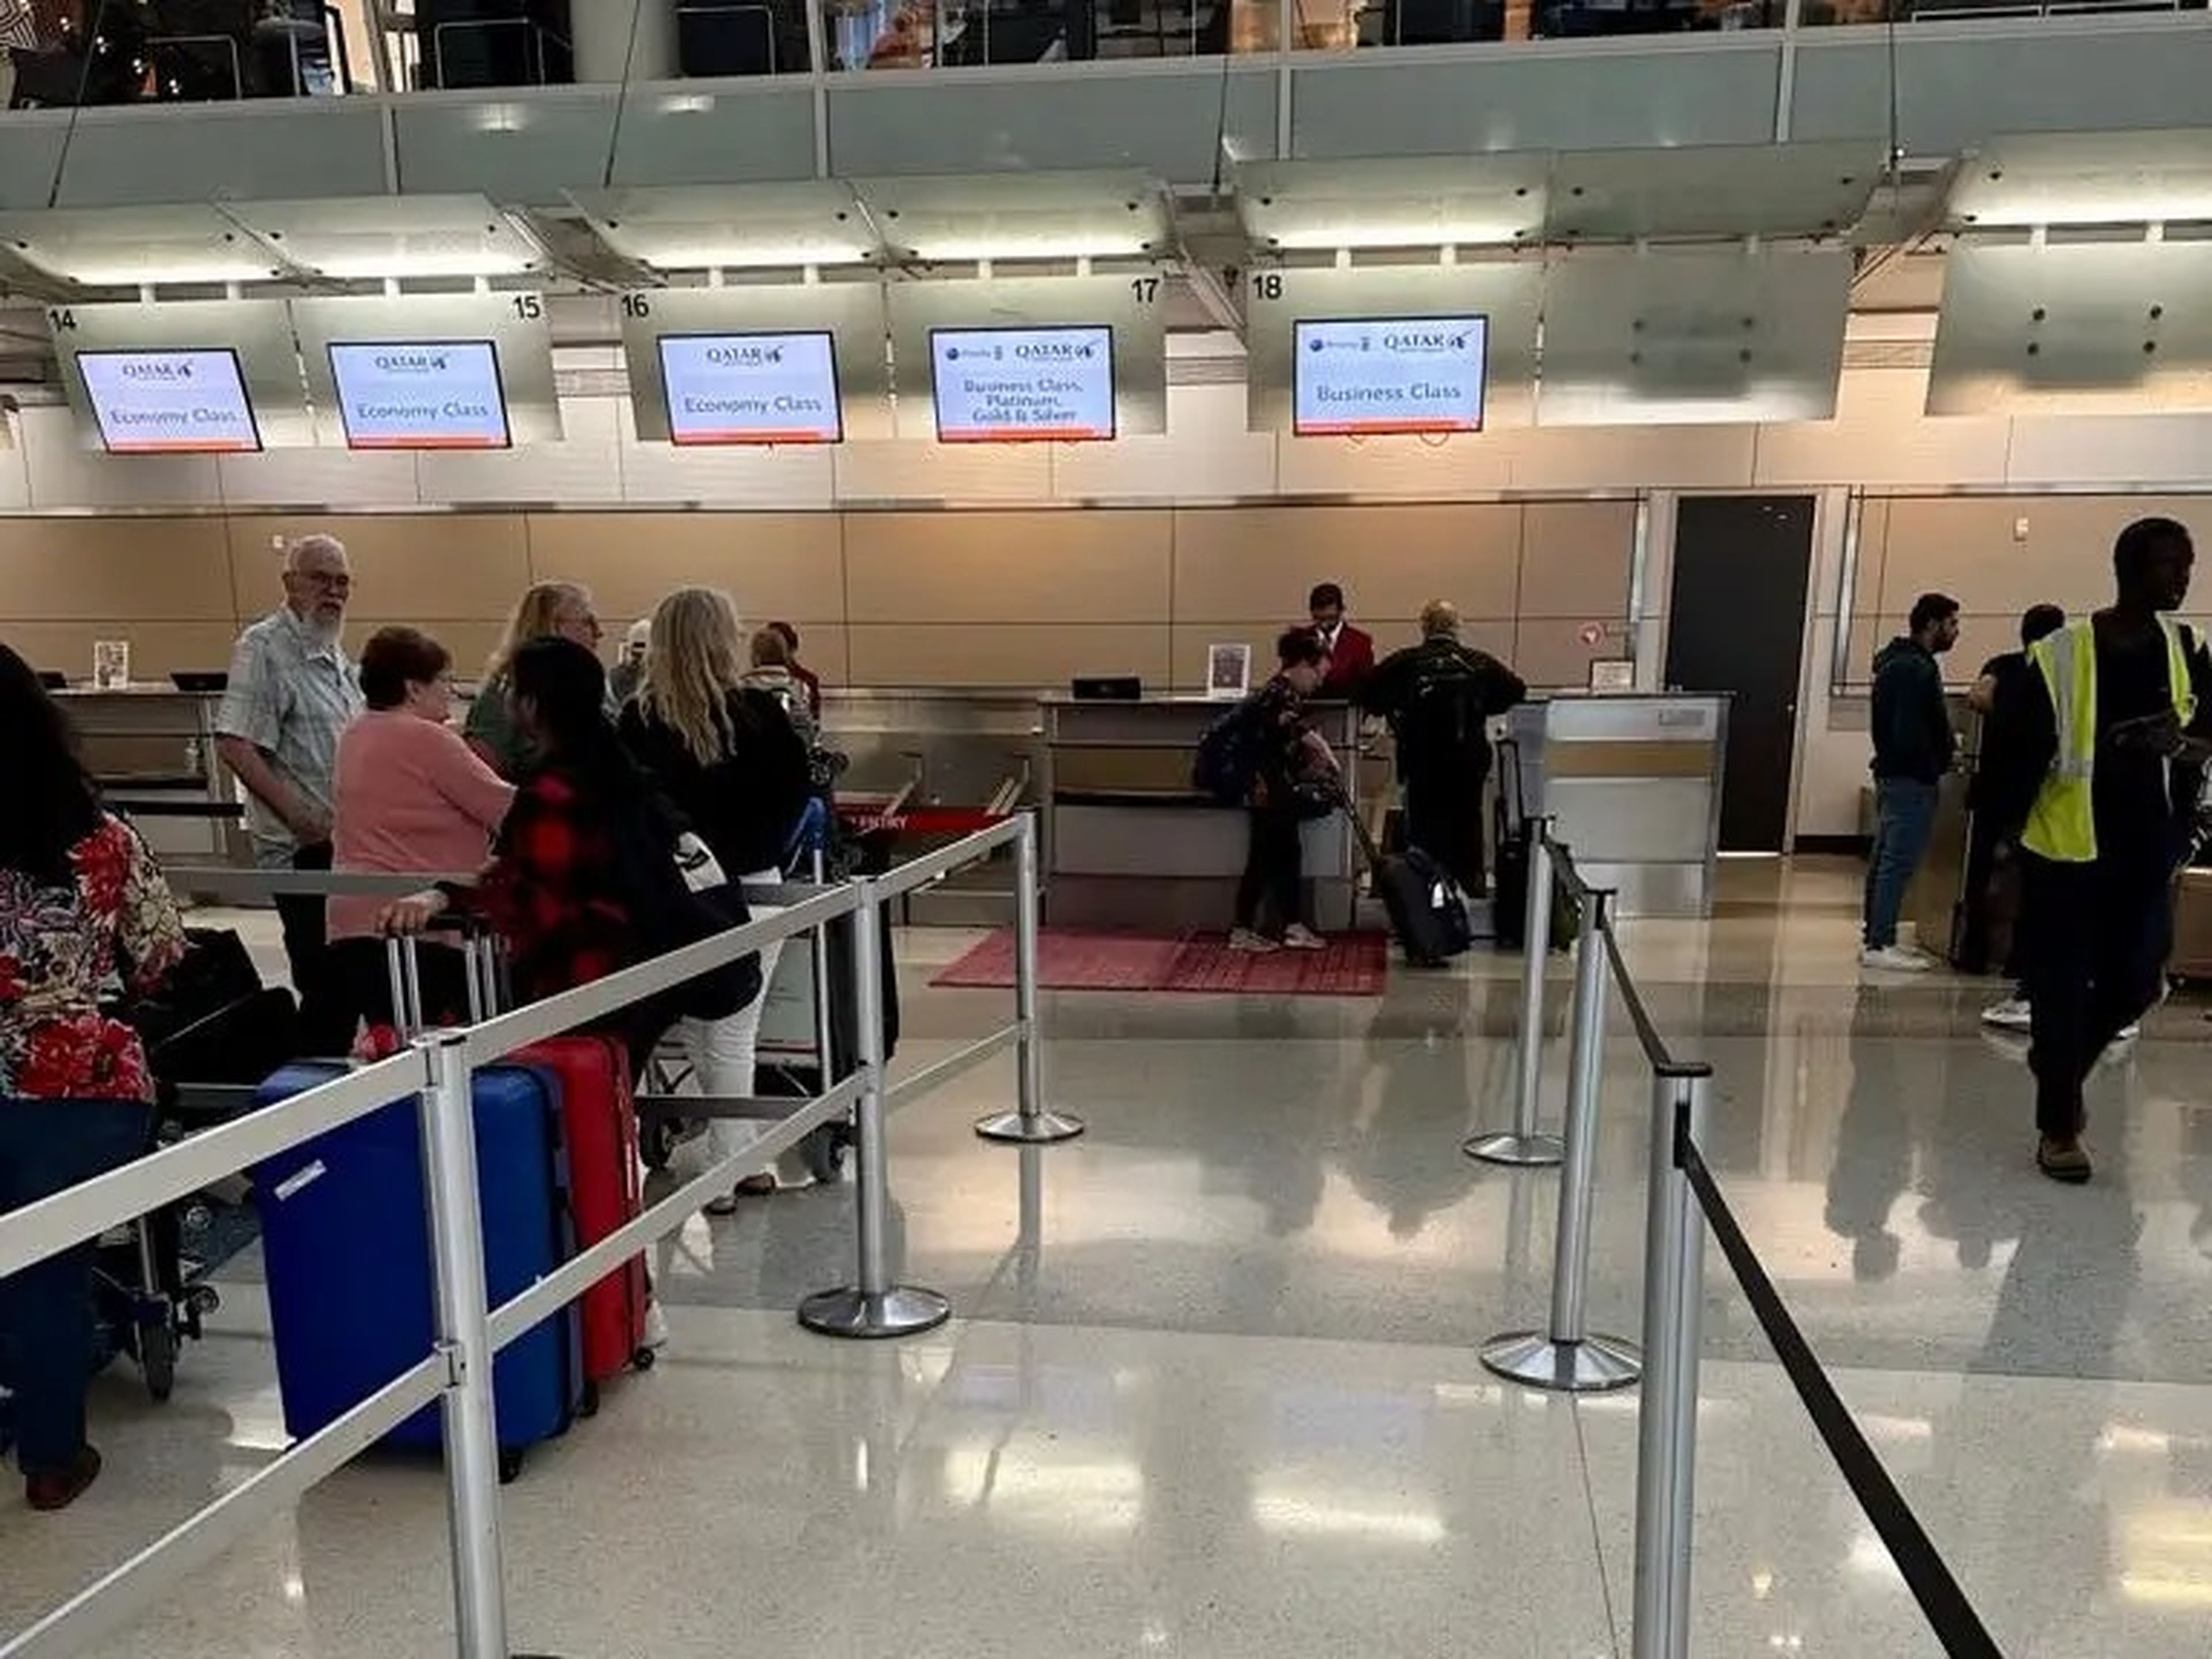 A line of people waiting to check in for Qatar Airways.